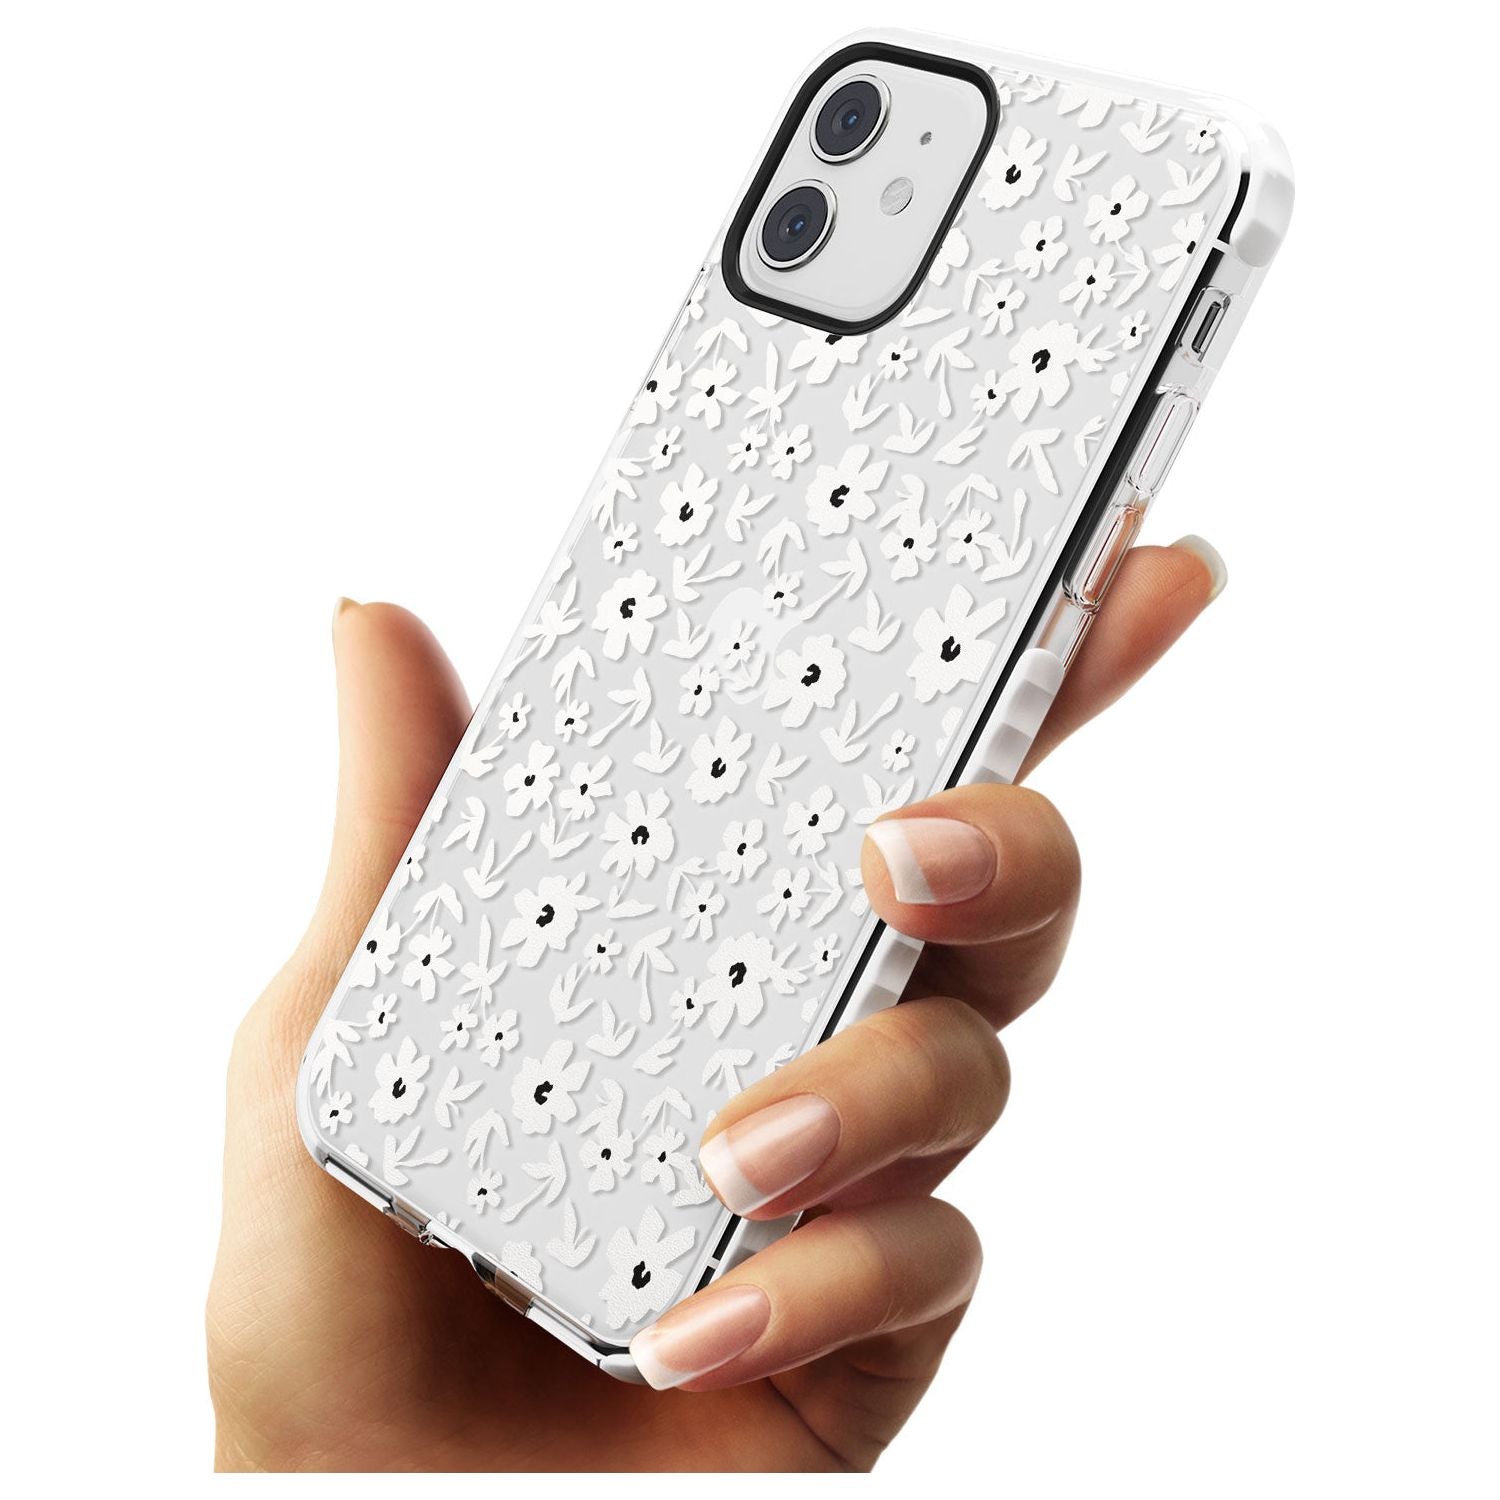 Floral Print on Clear - Cute Floral Design Slim TPU Phone Case for iPhone 11